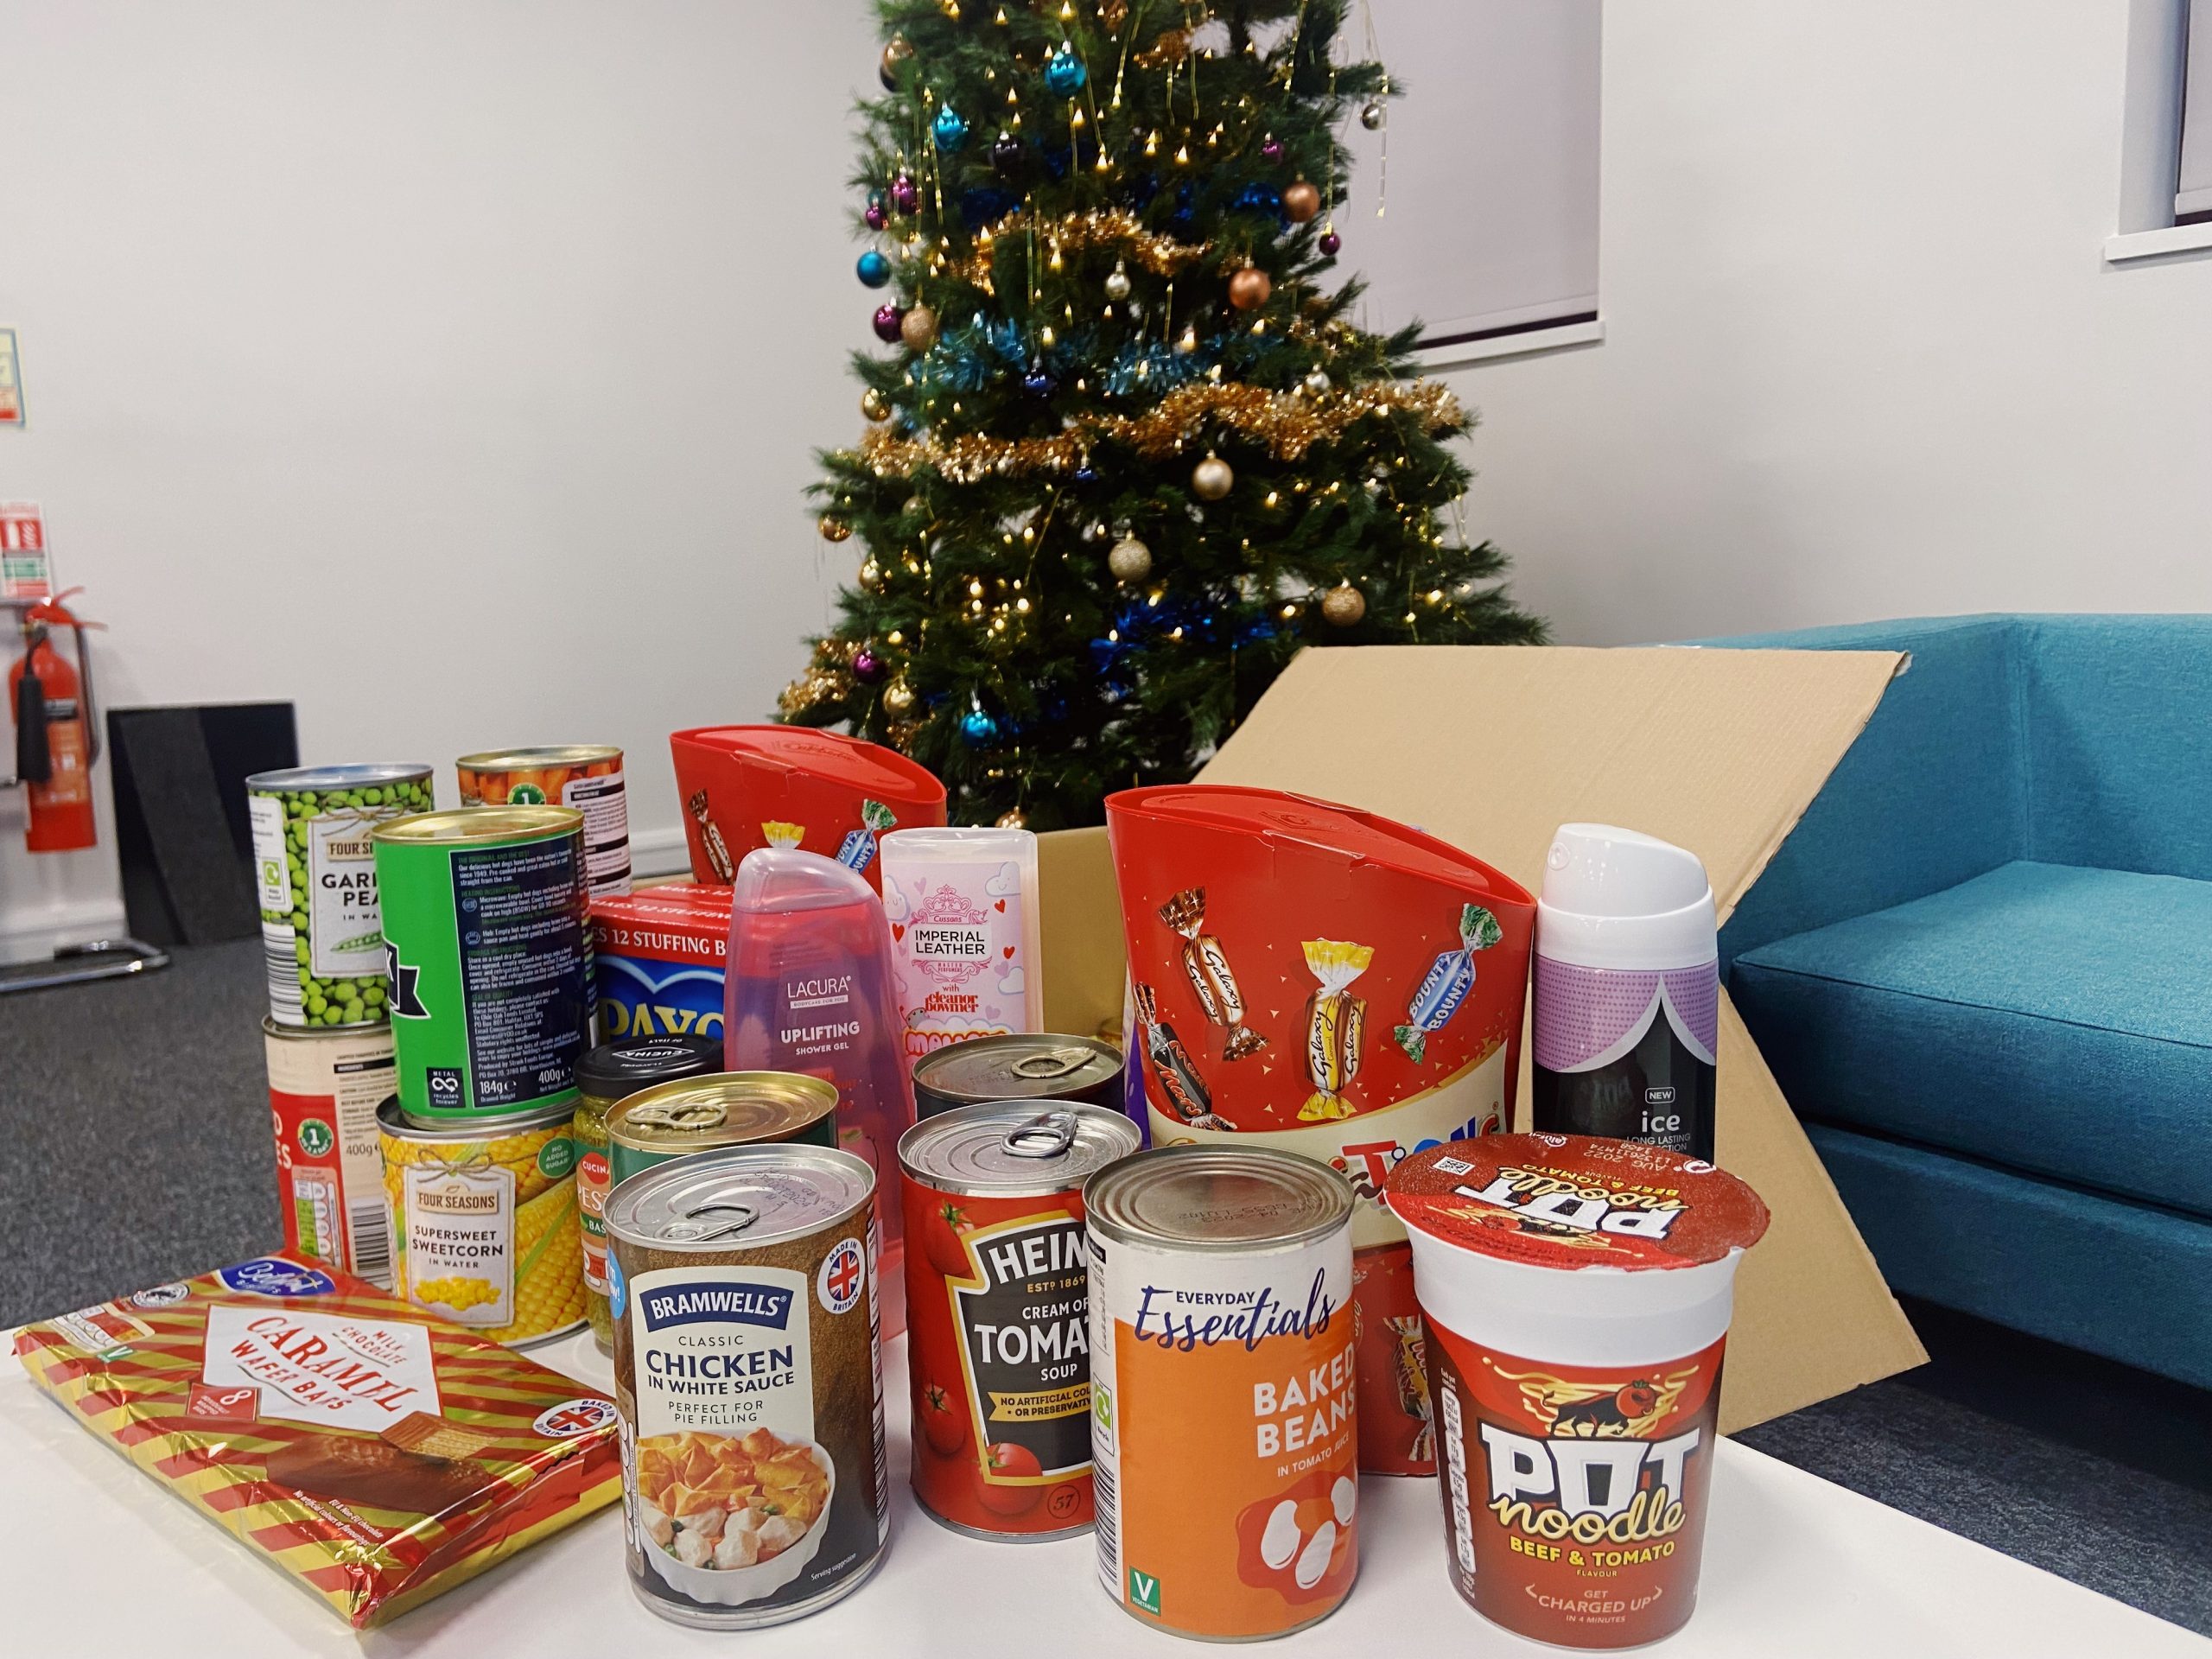 How we’re doing our bit to help families across the UK this winter